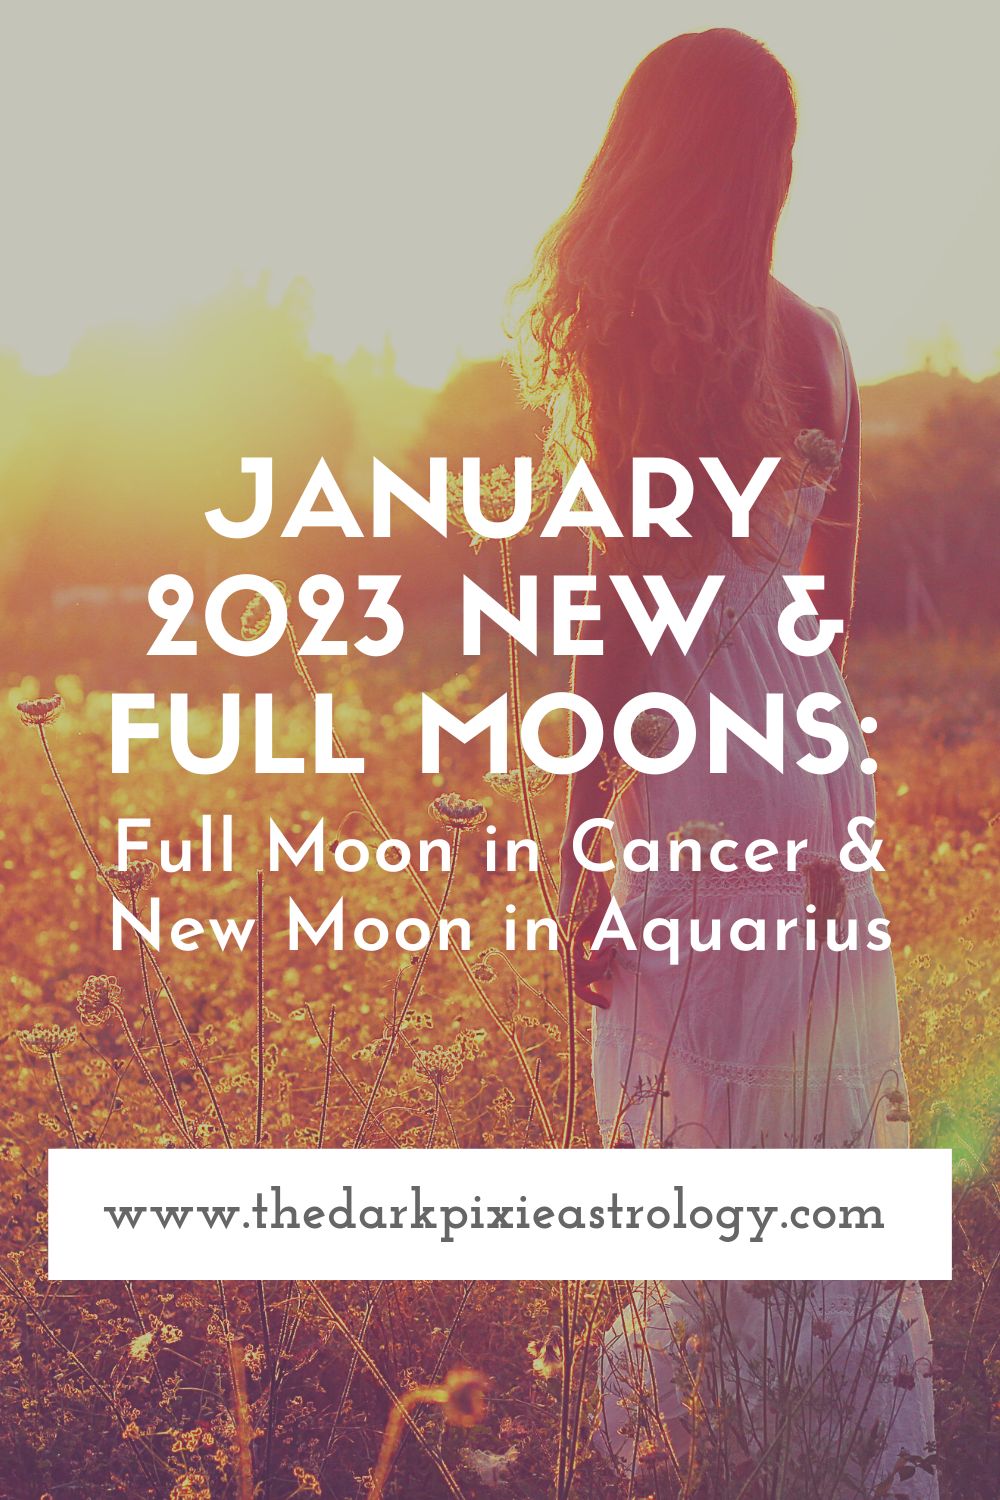 January 2023 New & Full Moons Full Moon in Cancer & New Moon in